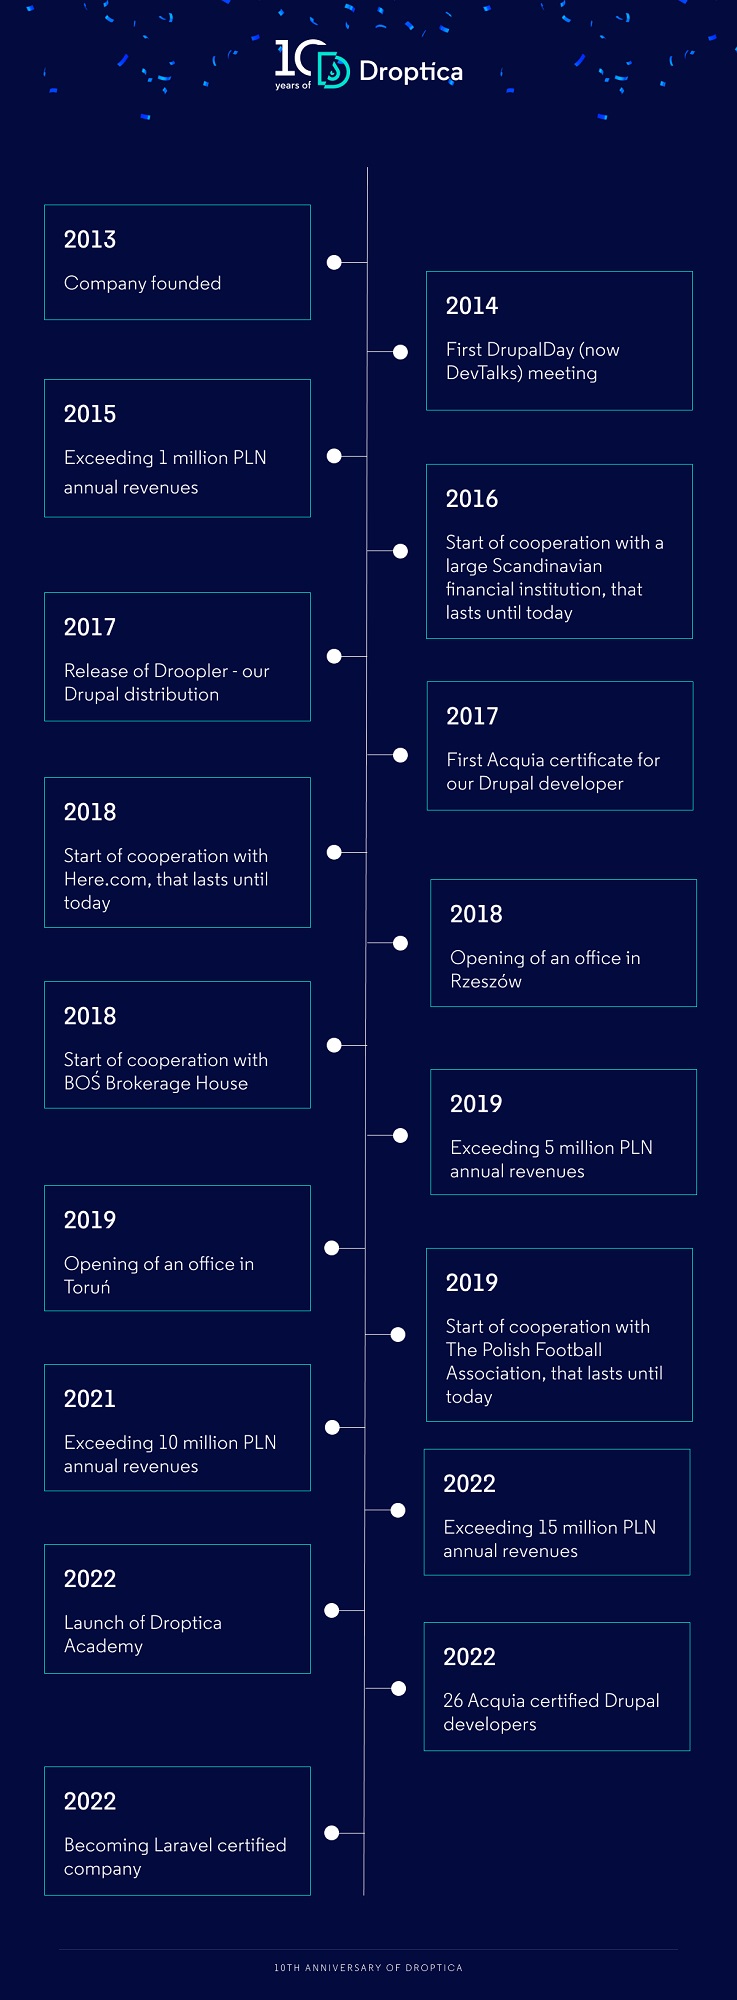 Infographic showing milestones in the 10-year history of the Droptica company